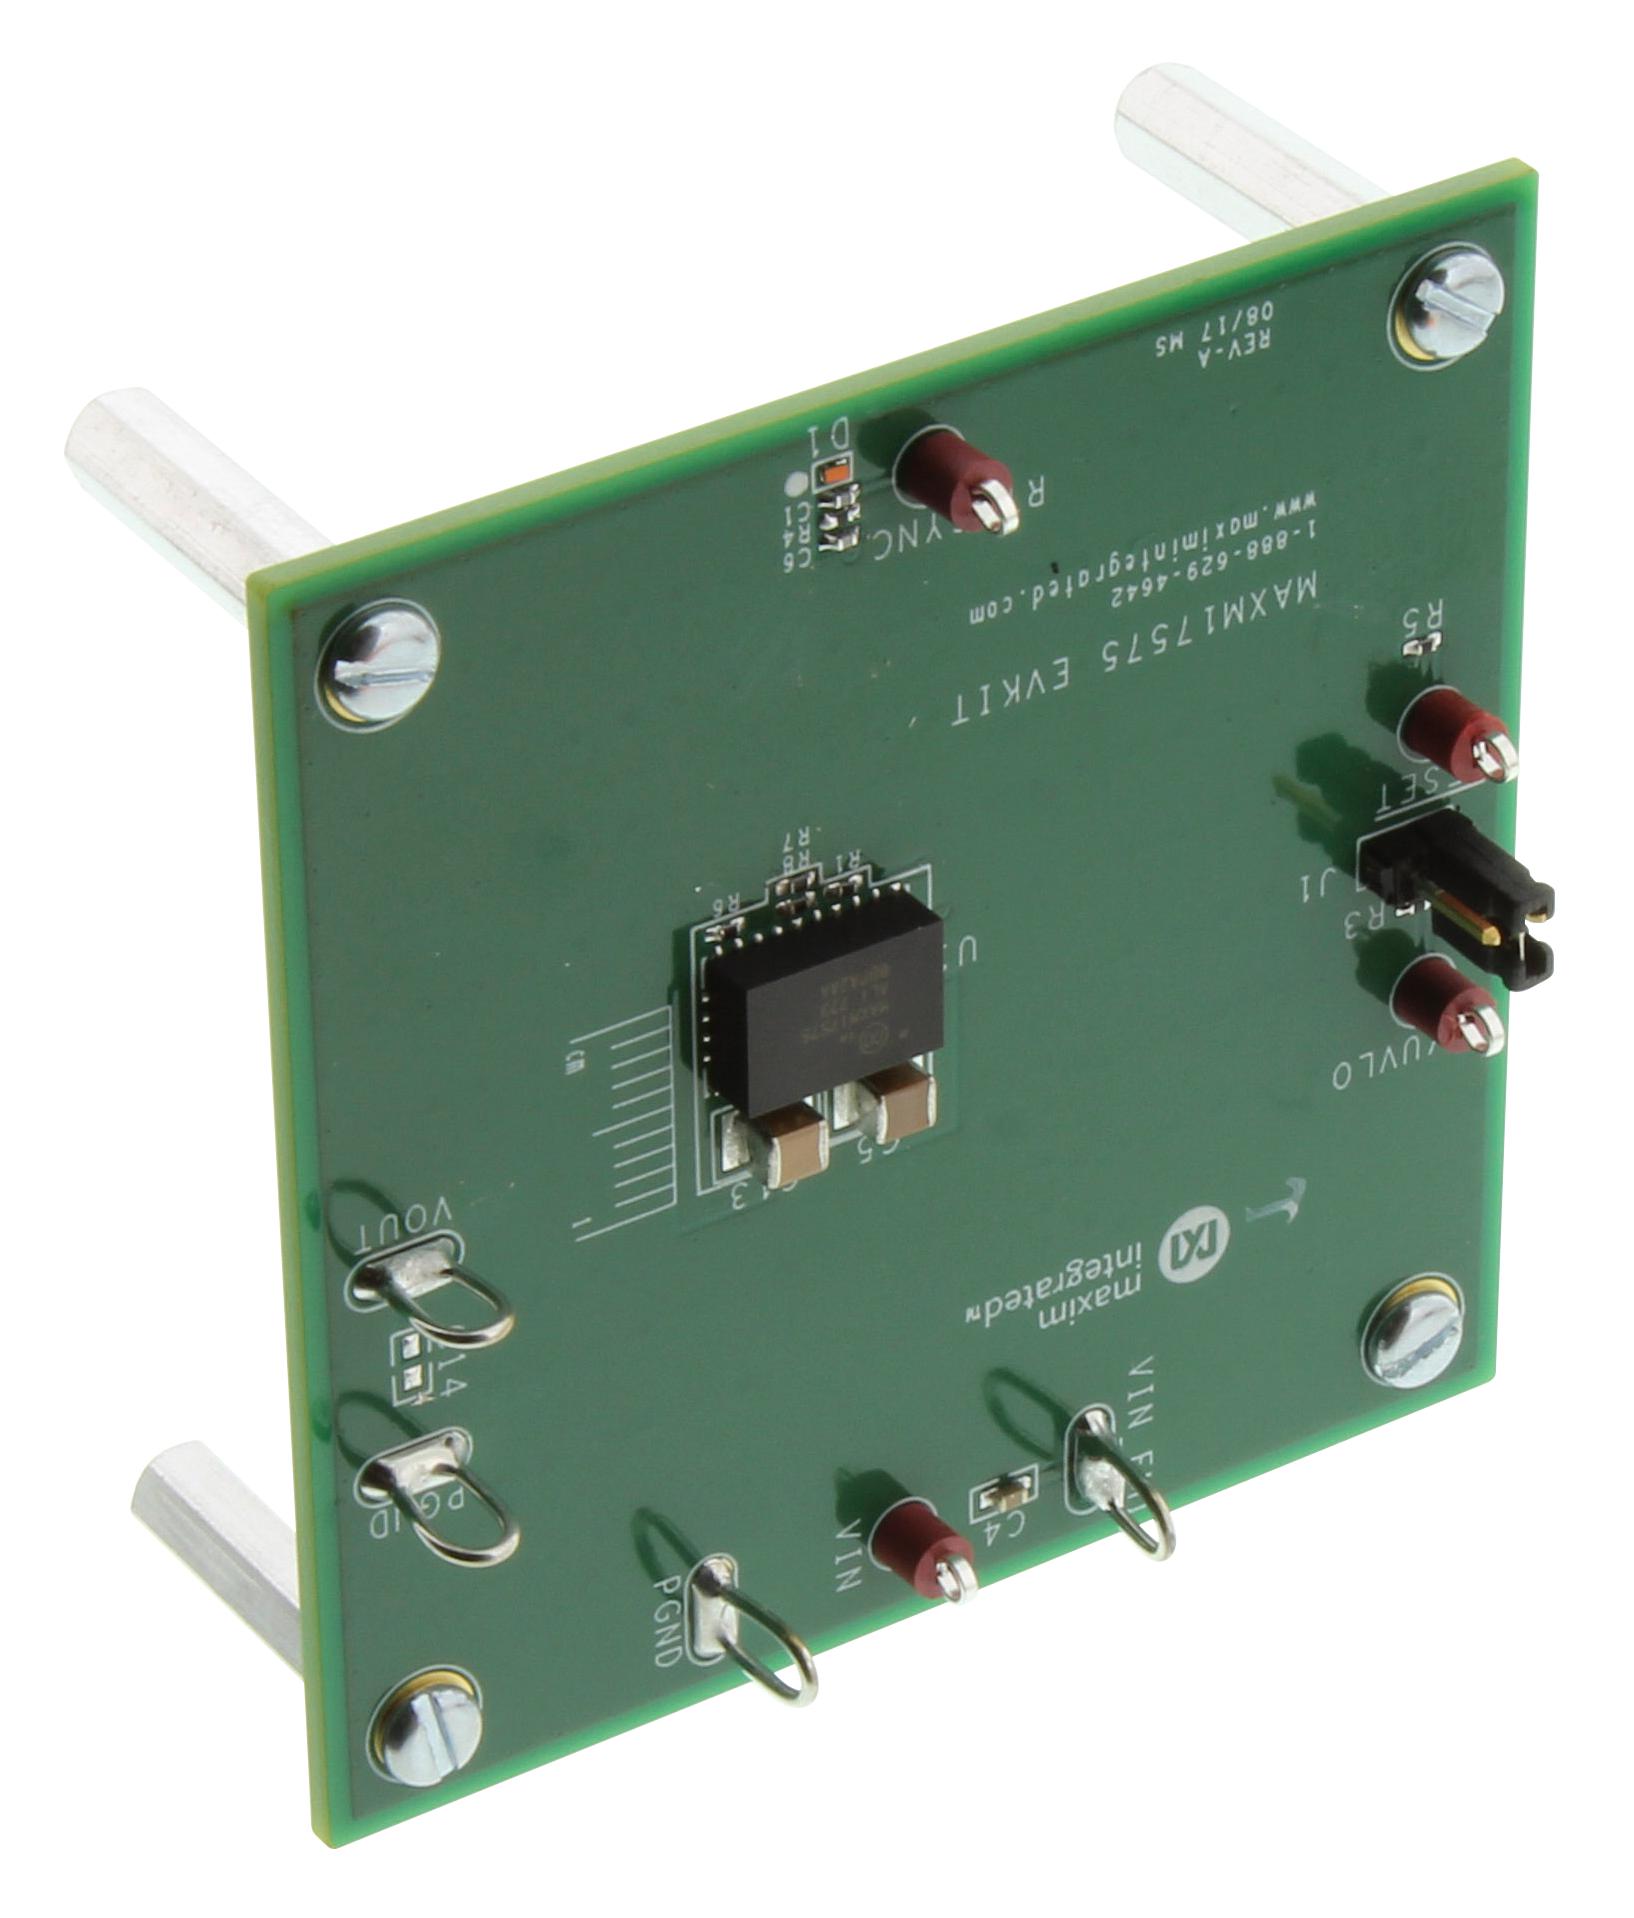 MAXM17575EVKIT# EVAL BOARD, SYNC STEP DOWN CONVERTER MAXIM INTEGRATED / ANALOG DEVICES